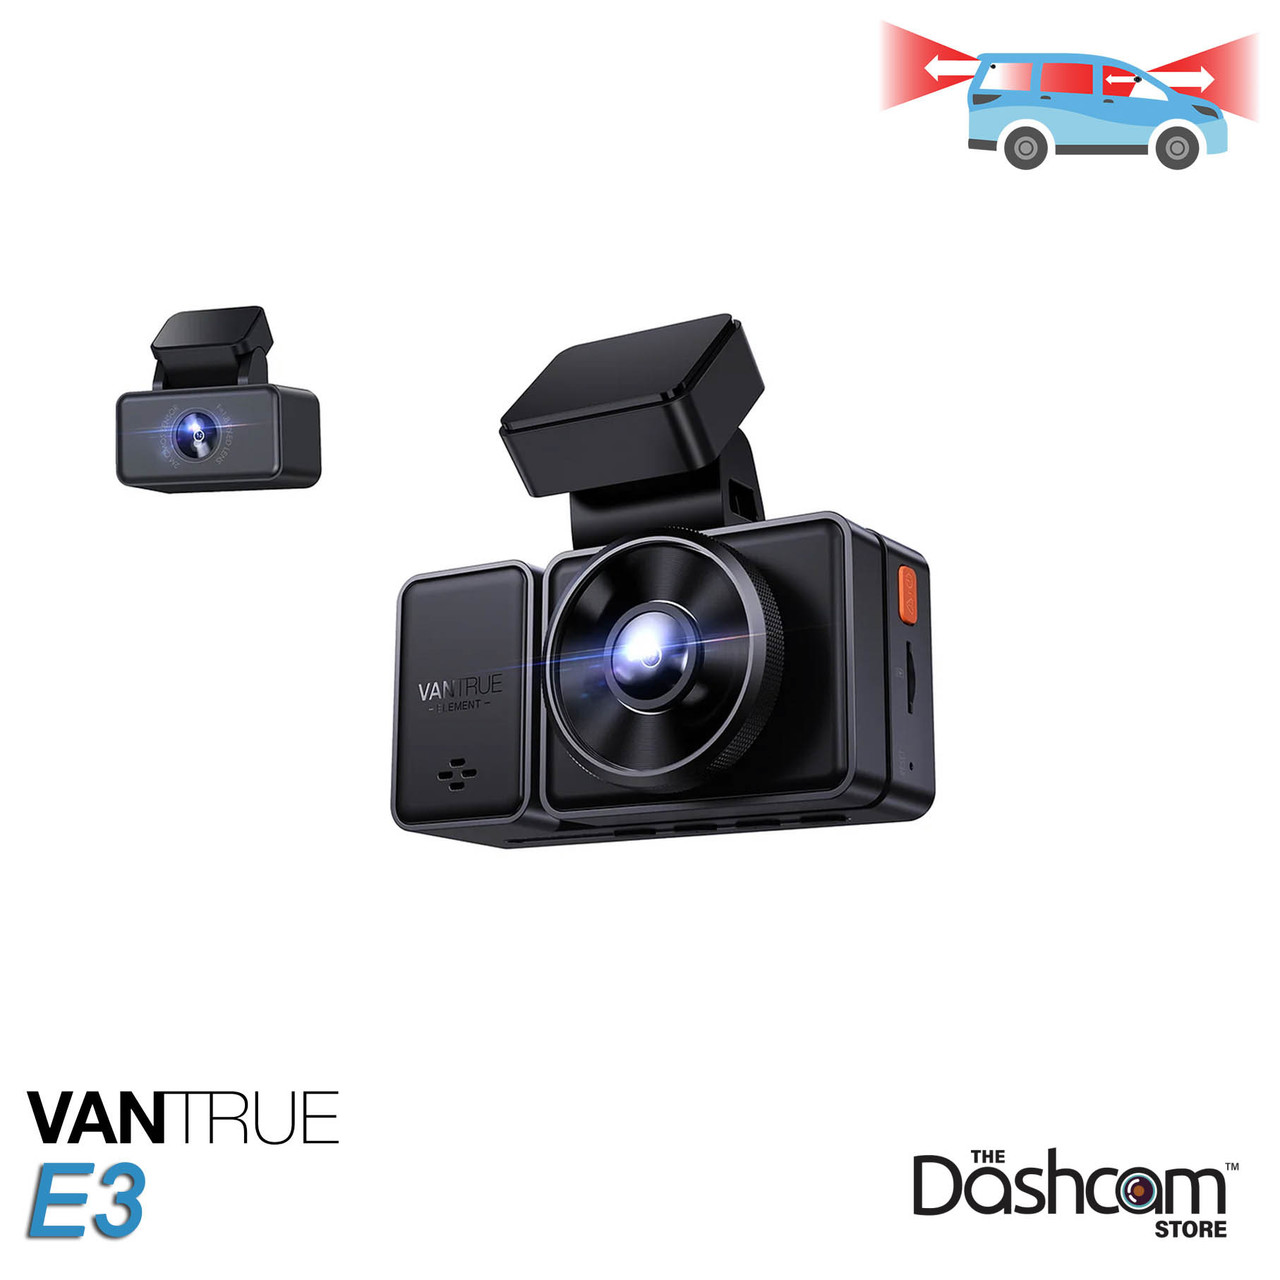 Vantrue Element 1 review: A great dash cam (during the day)